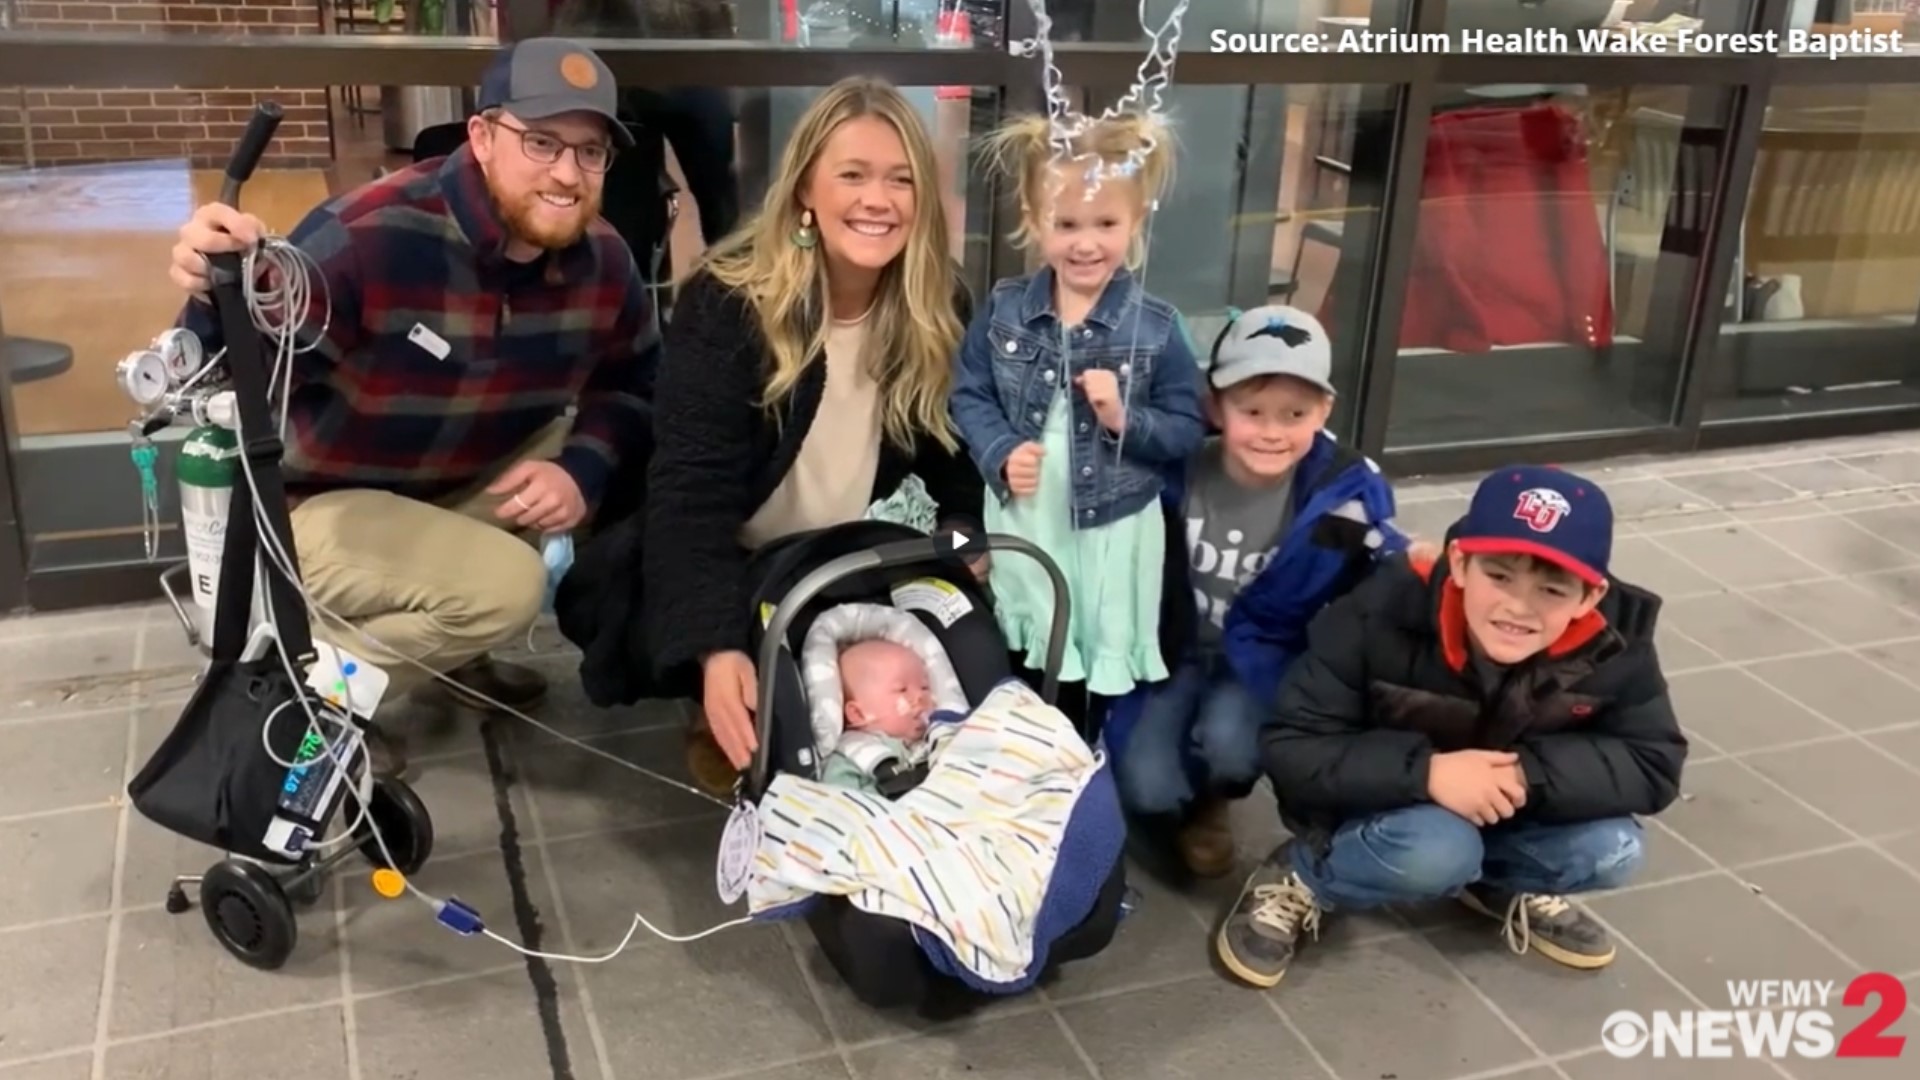 Marshall Duncan is home for Christmas after spending 104 days in the NICU at Brenner Children's Hospital. His first meeting with his siblings will melt your heart.